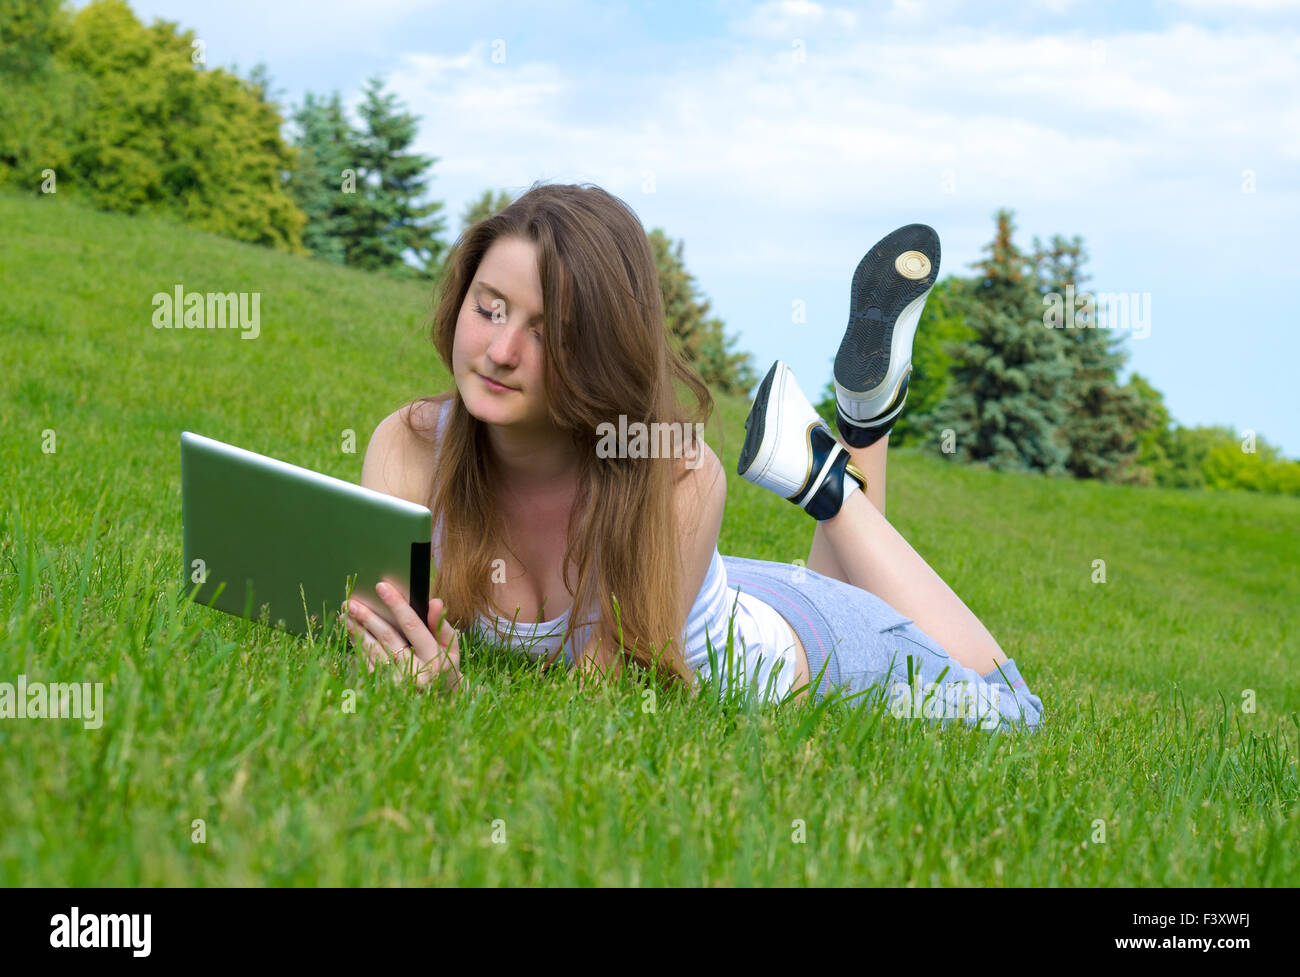 Woman relaxing with a écran tactile Tablet Banque D'Images